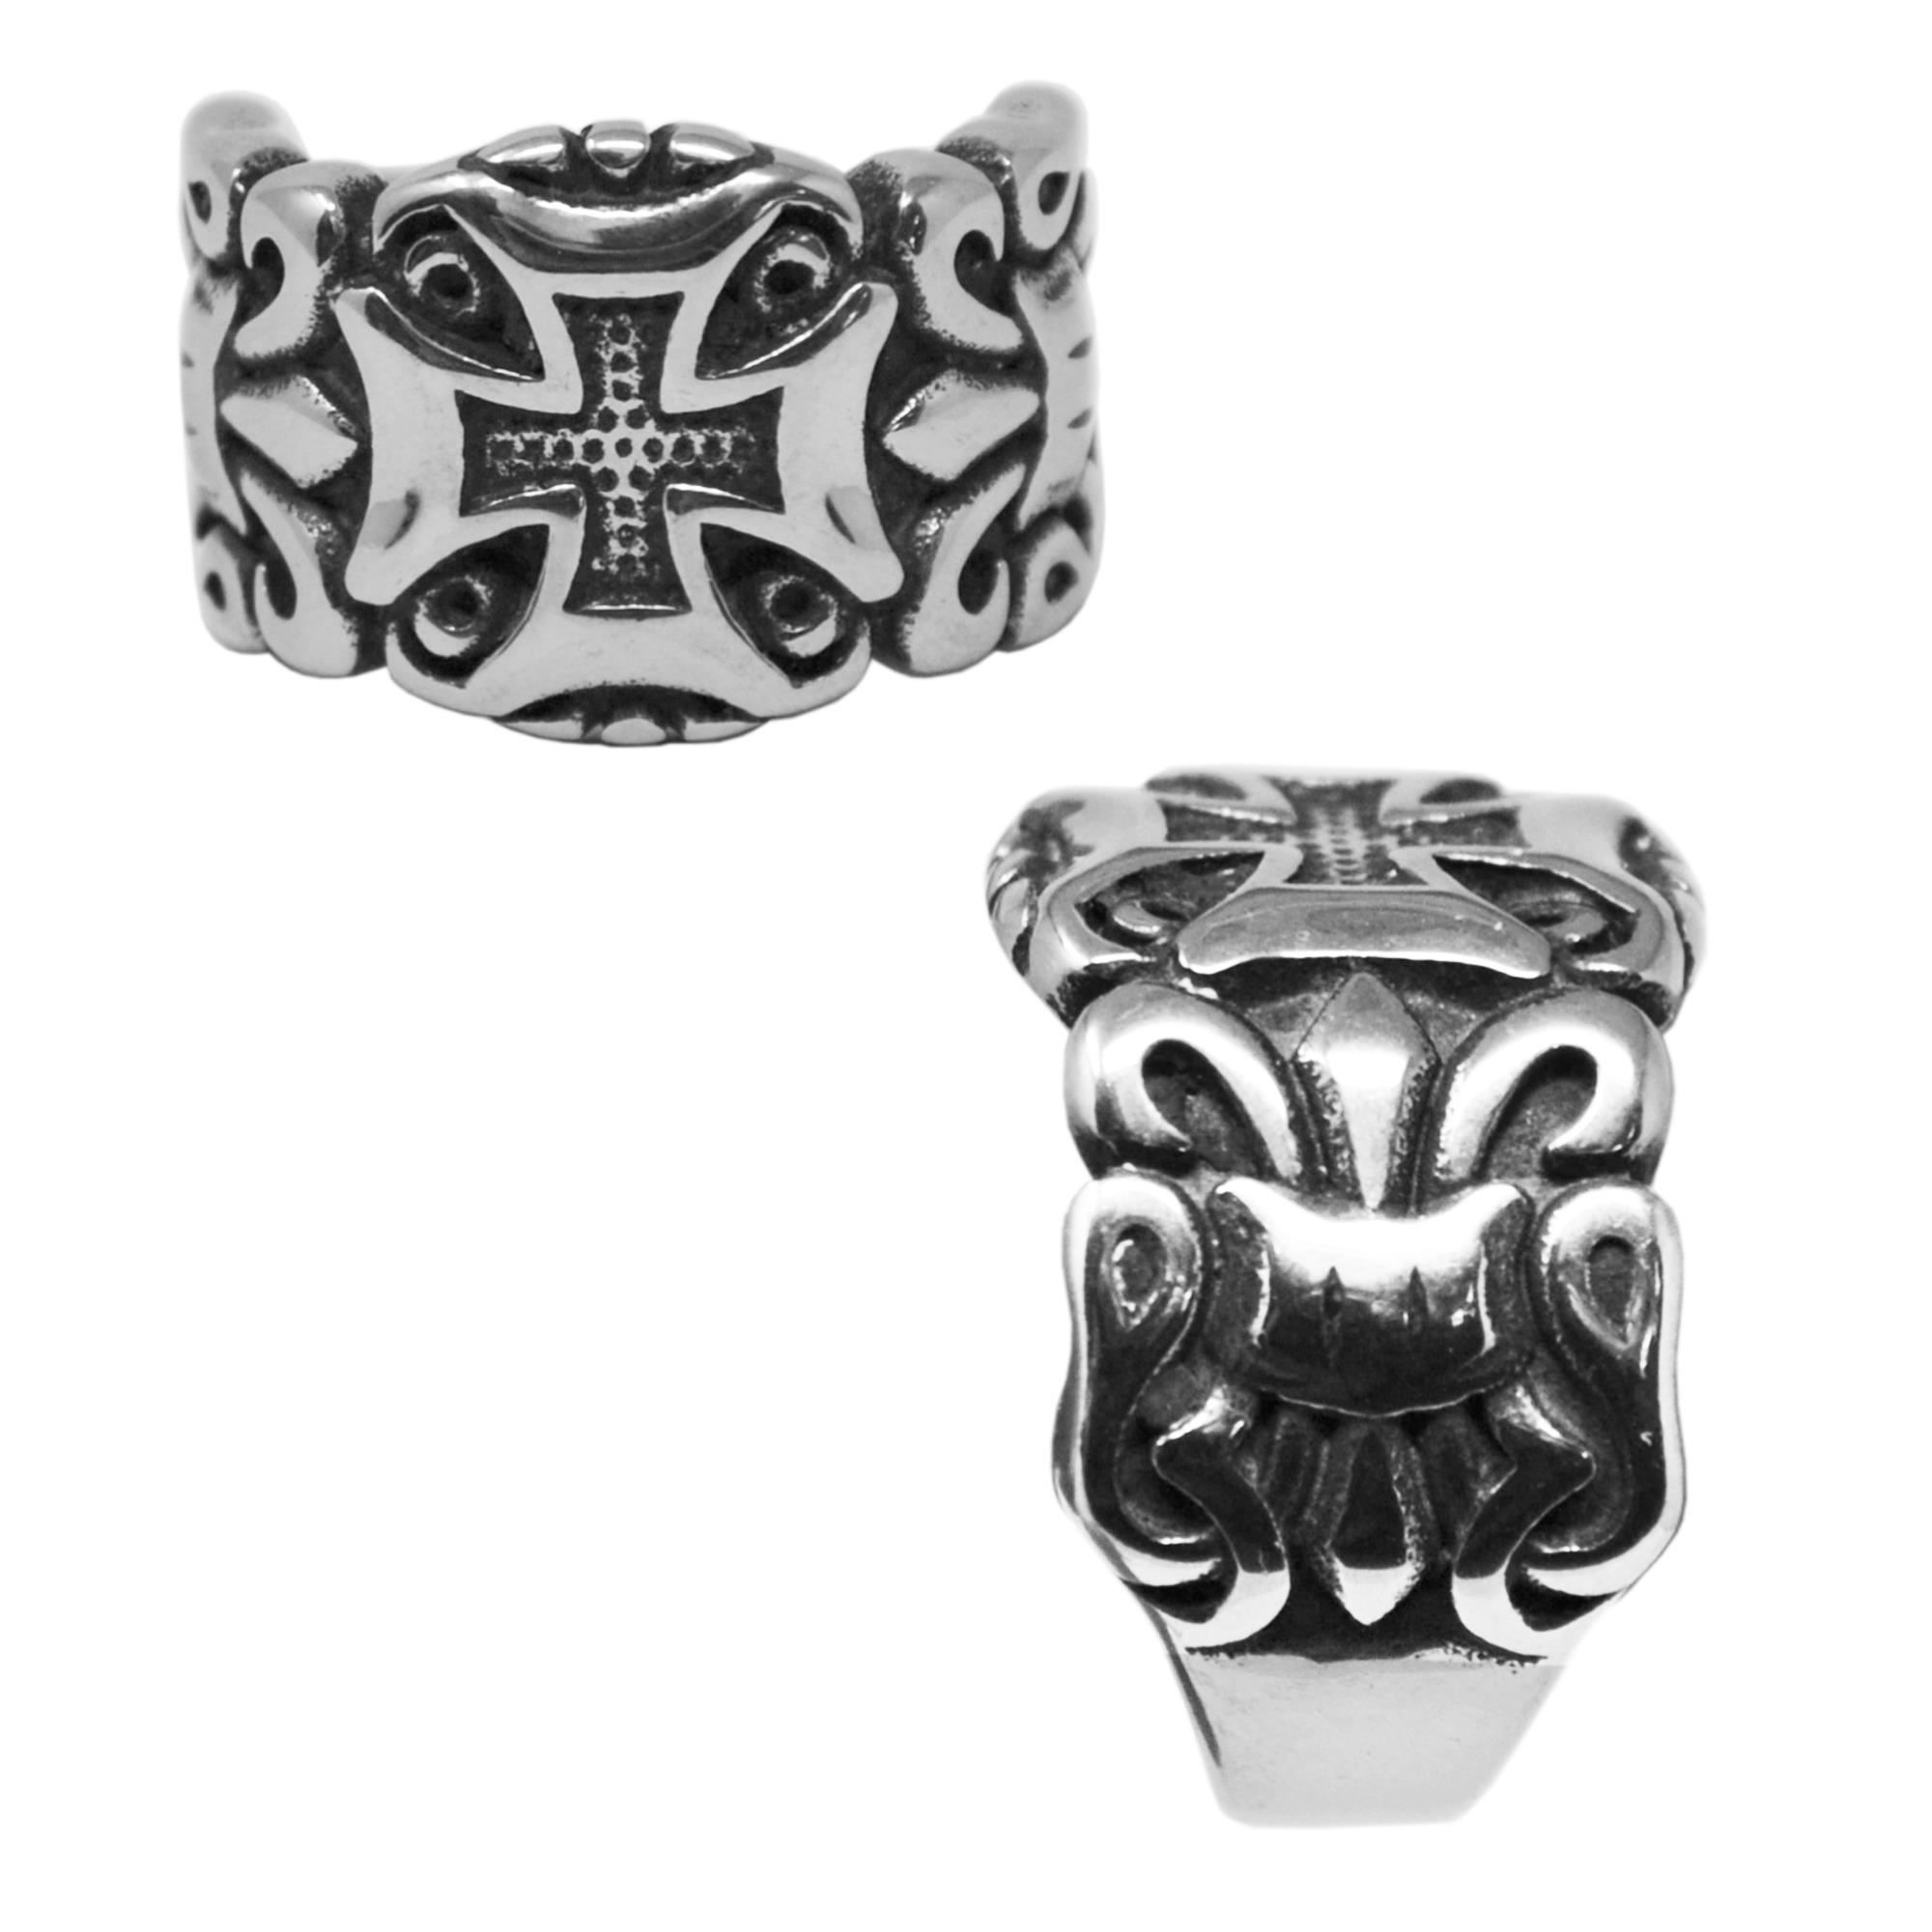 STAINLESS STEEL IRON CROSS RING